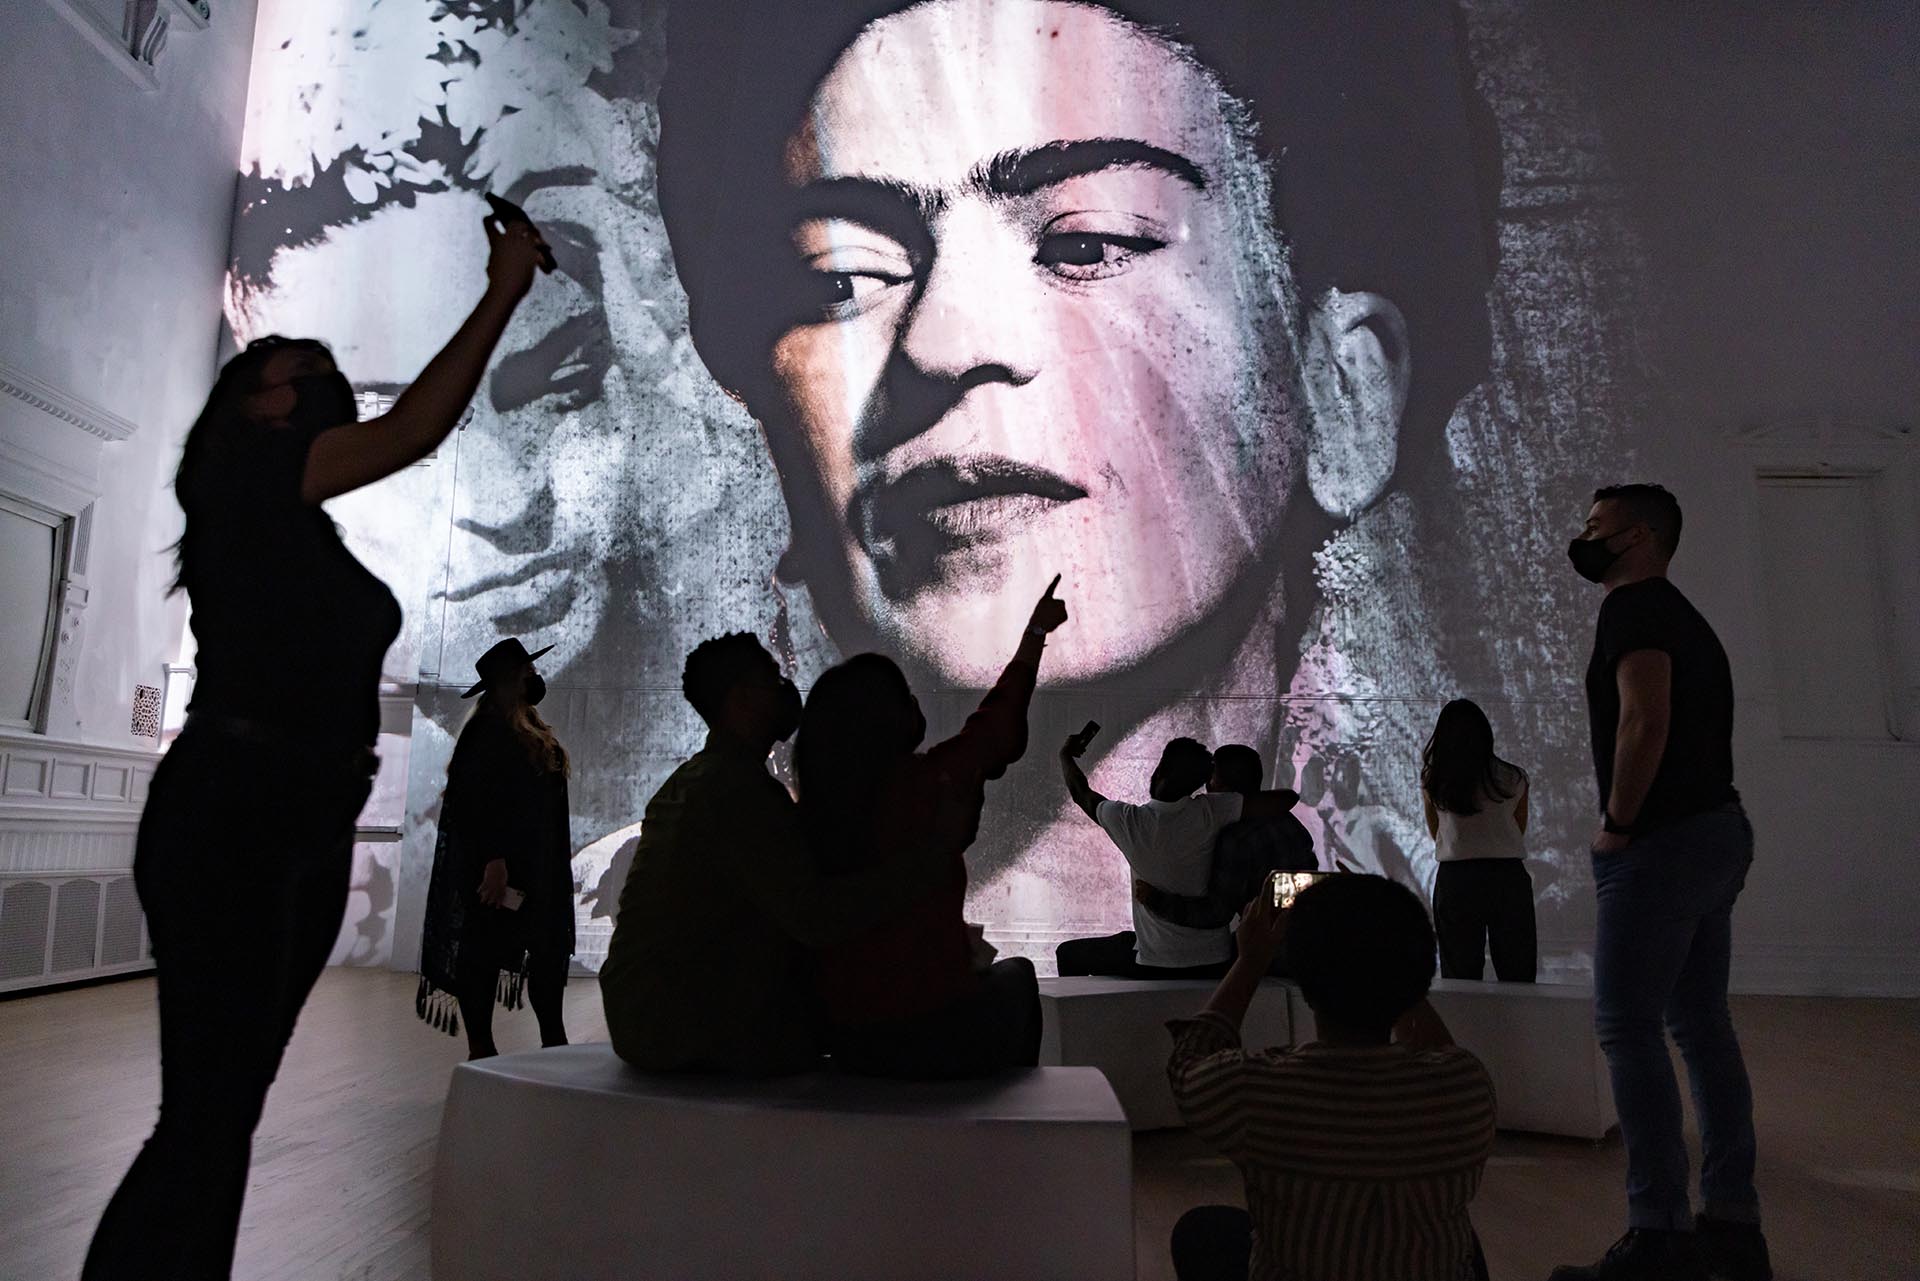 Photo from the Immersive Frida Kahlo exhibition showing Kahlo's image projected on the wall and spectator silhouettes in the foreground